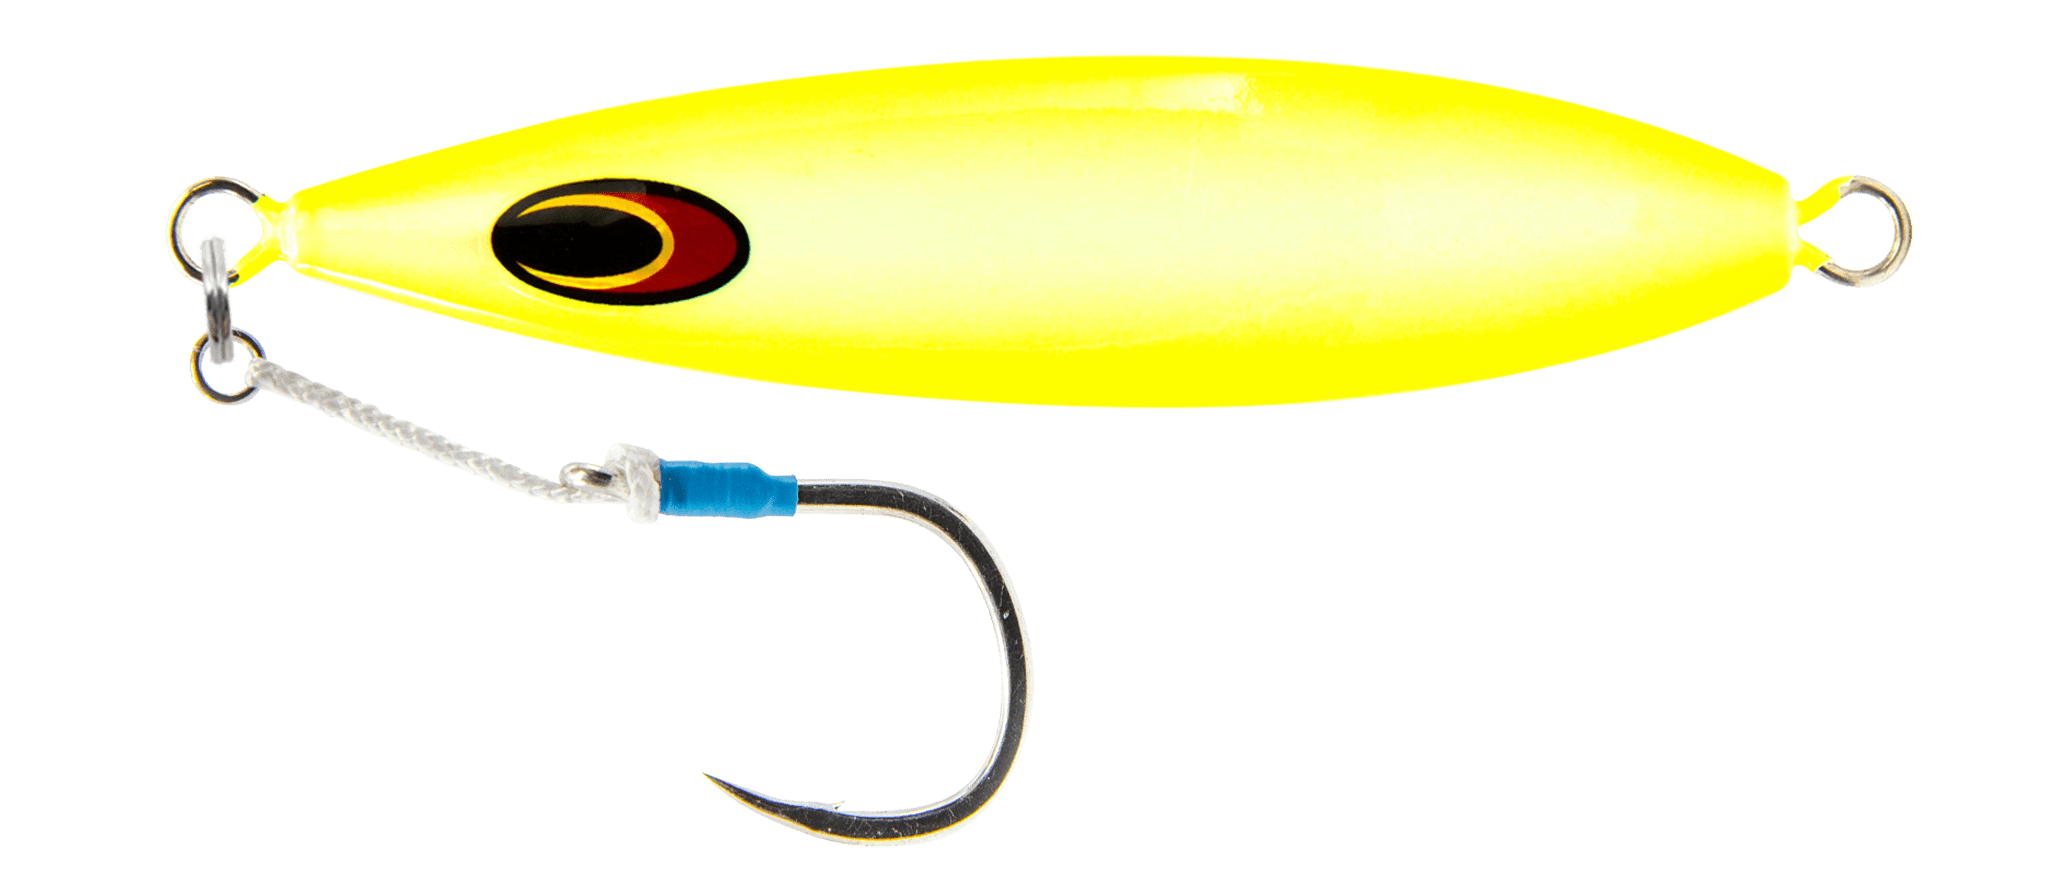 Nomad Tackle Chug Norris 150 Popper Fishing Lure, 6 - Holo Ghost Shad